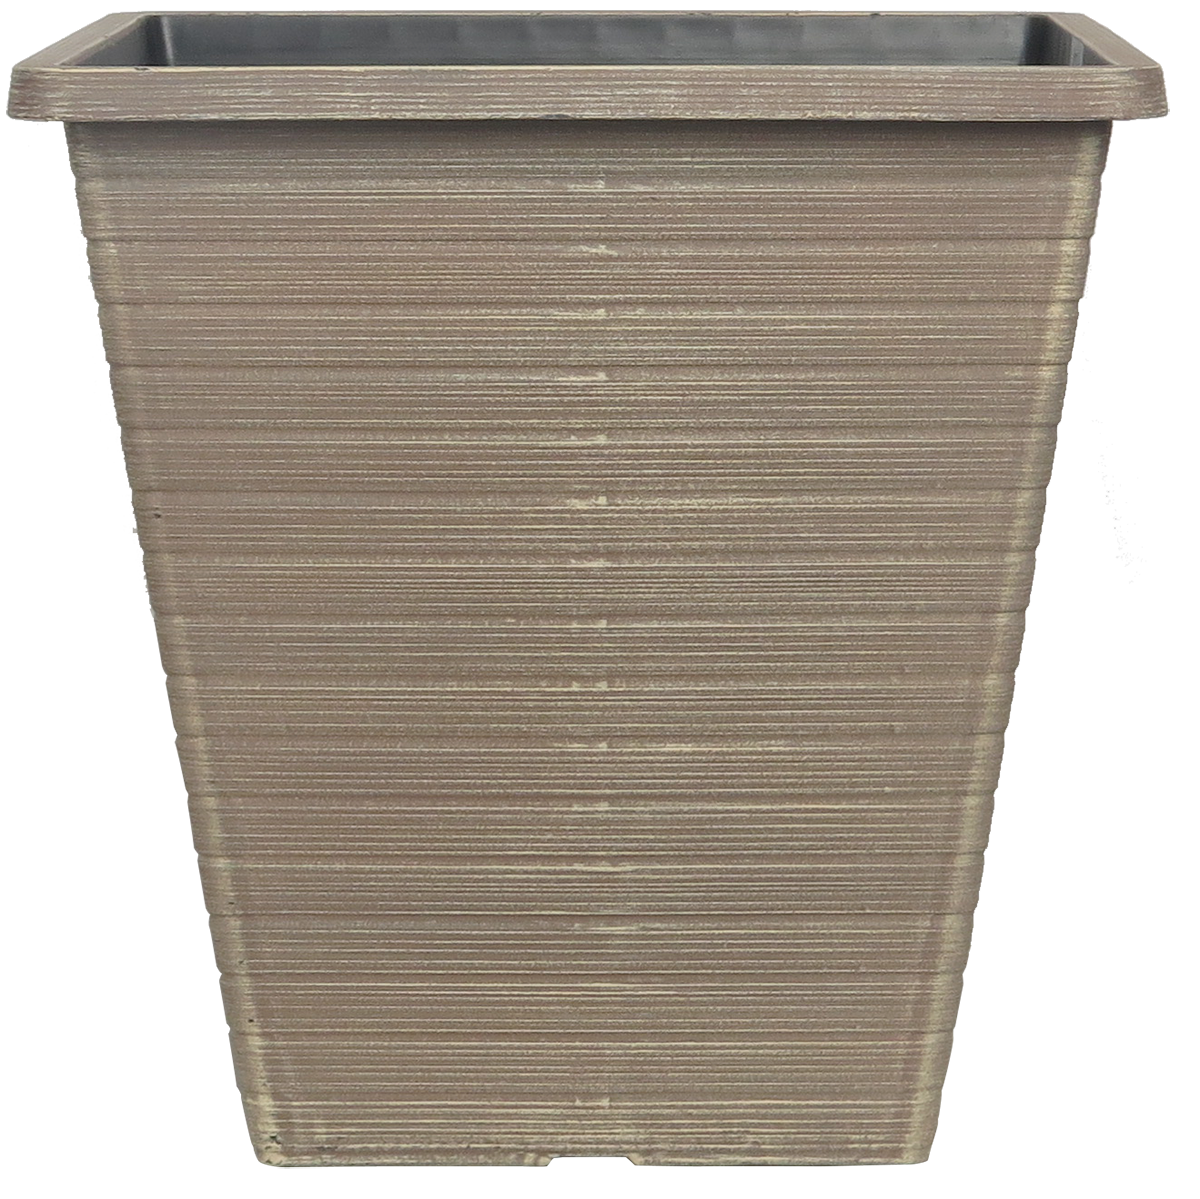 14 Inch Evans Tall Square Planter Vintage Wood - 17 per case